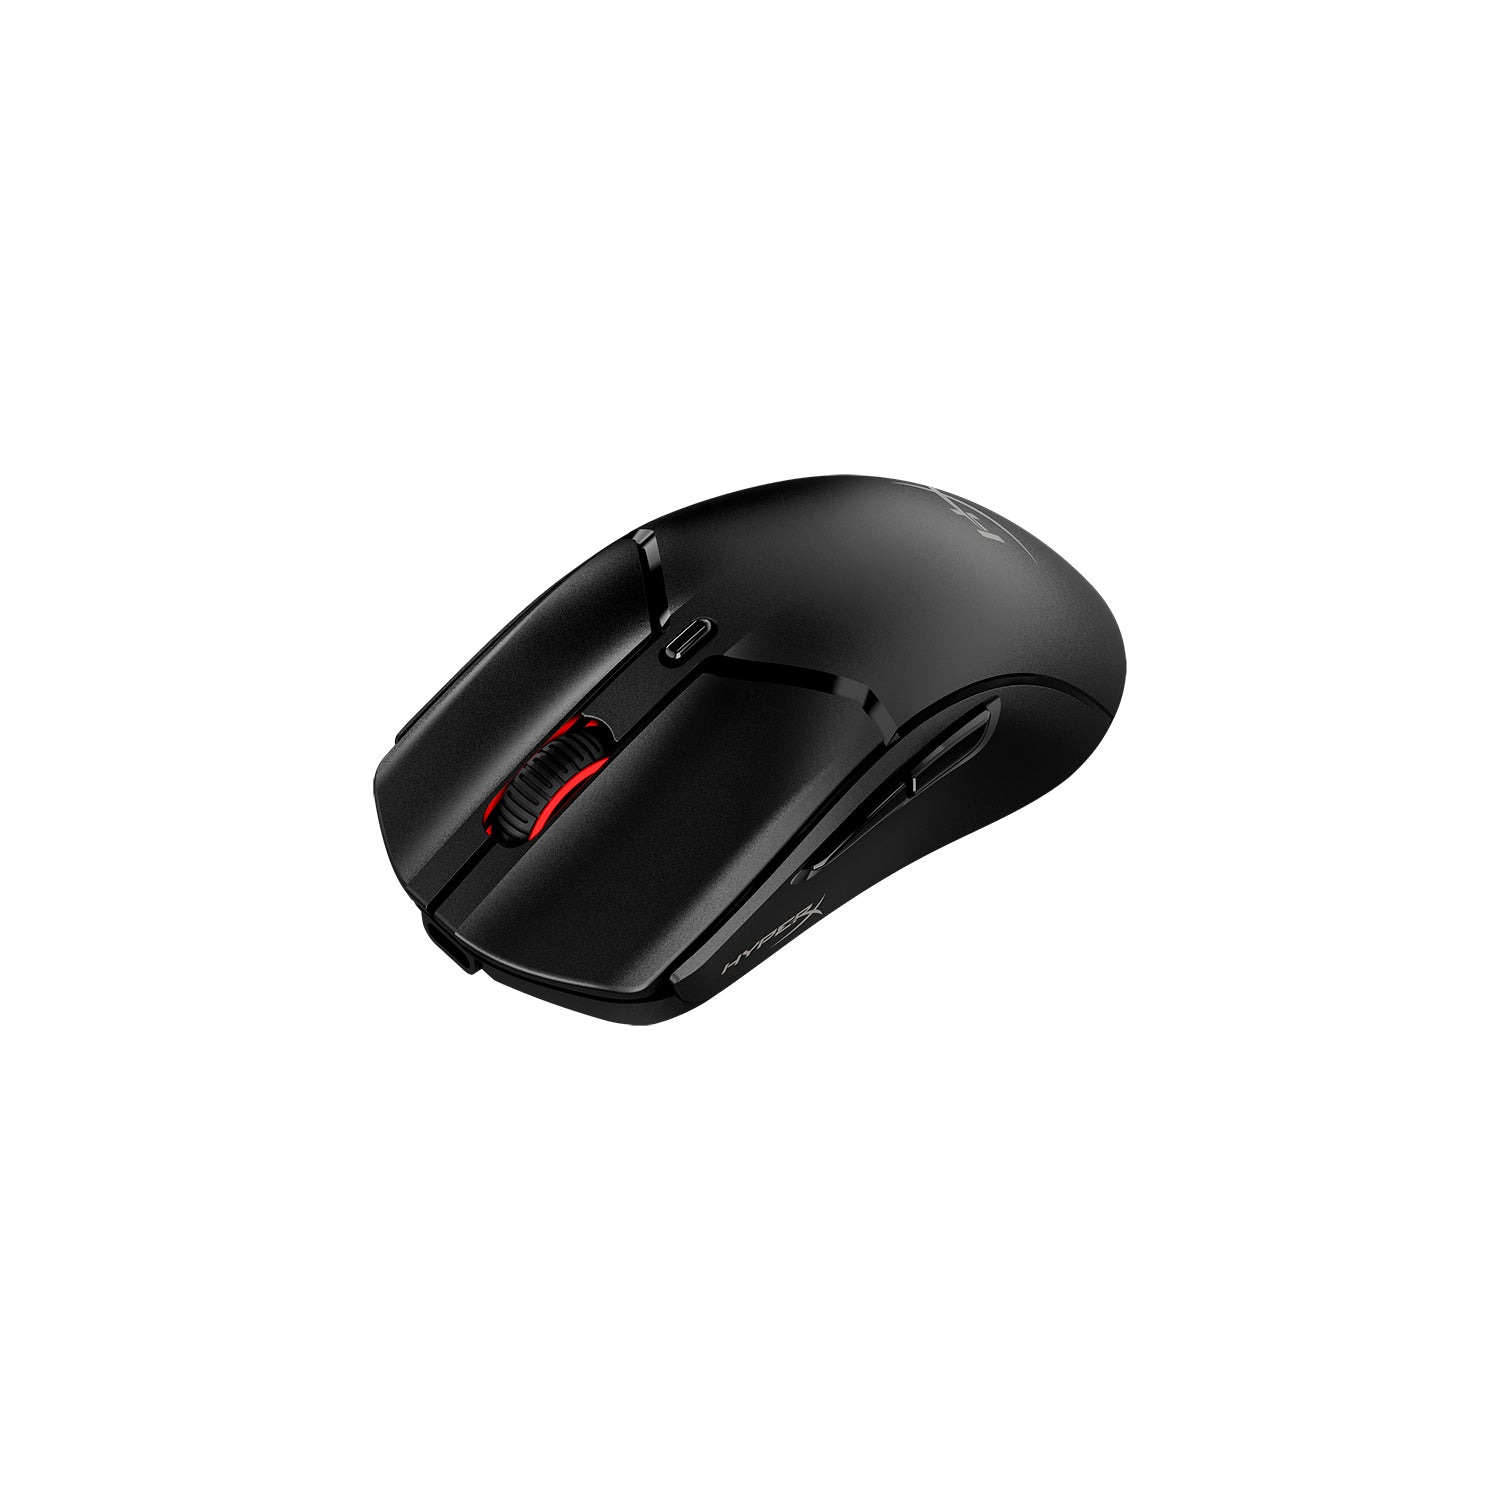 HyperX Pulsefire Haste 2 Mini Wireless Black Gaming Mouse - second angled view pointing to the left side